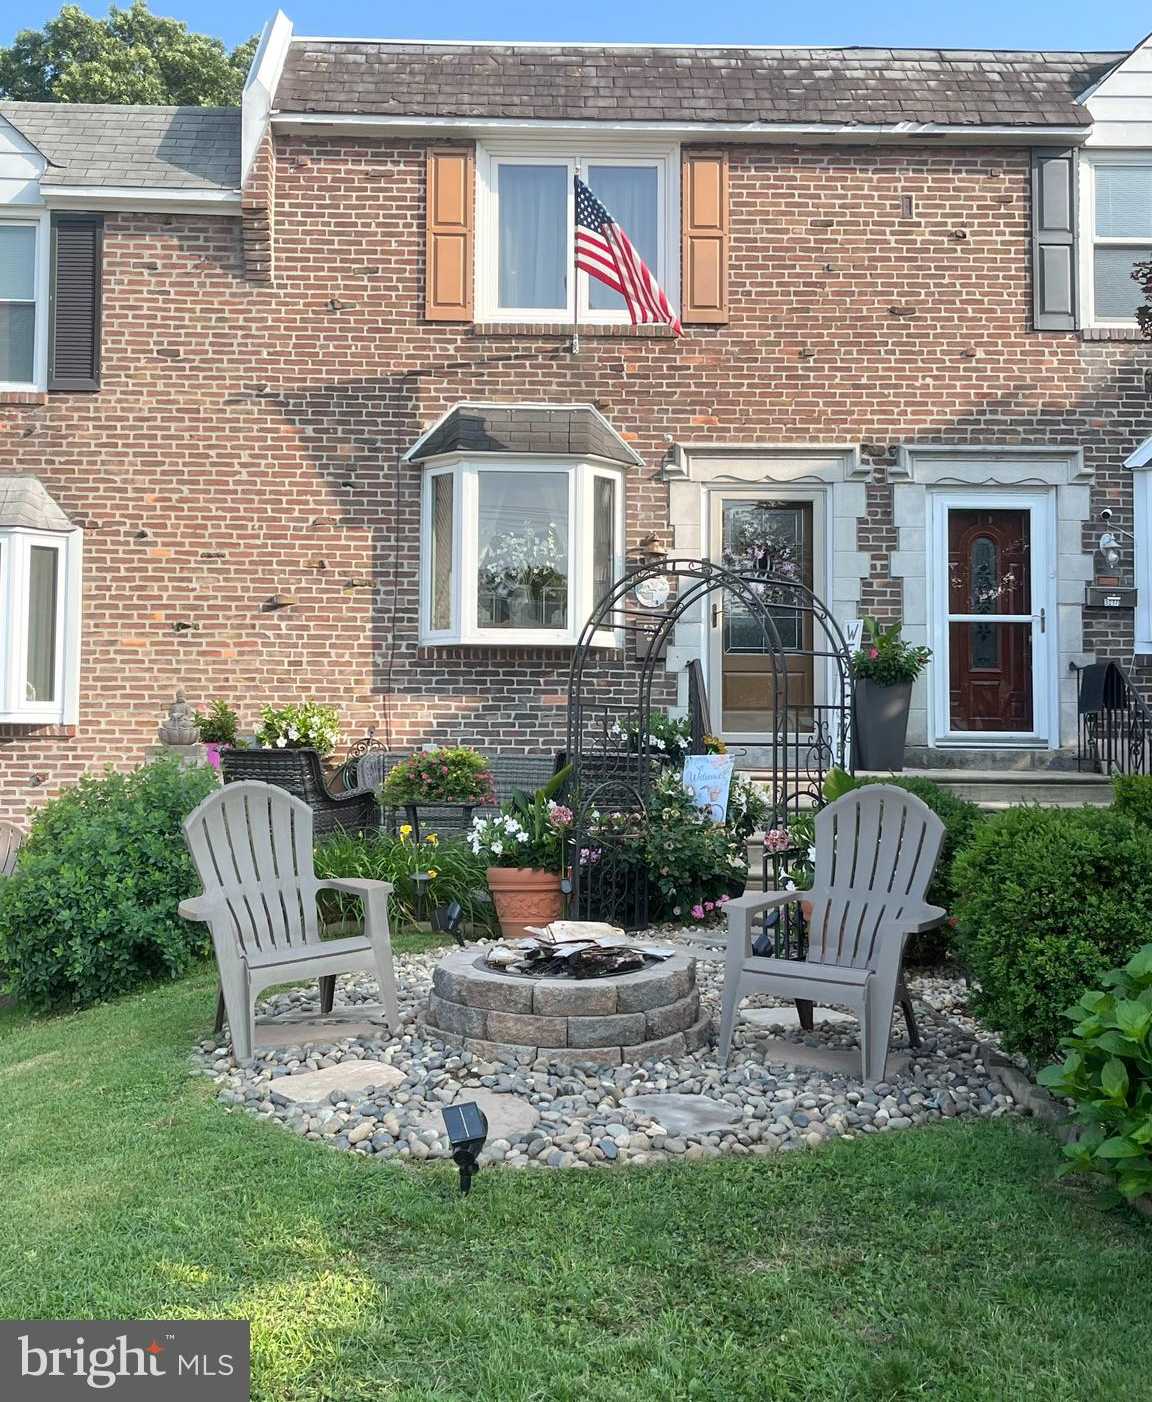 View CLIFTON HEIGHTS, PA 19018 townhome